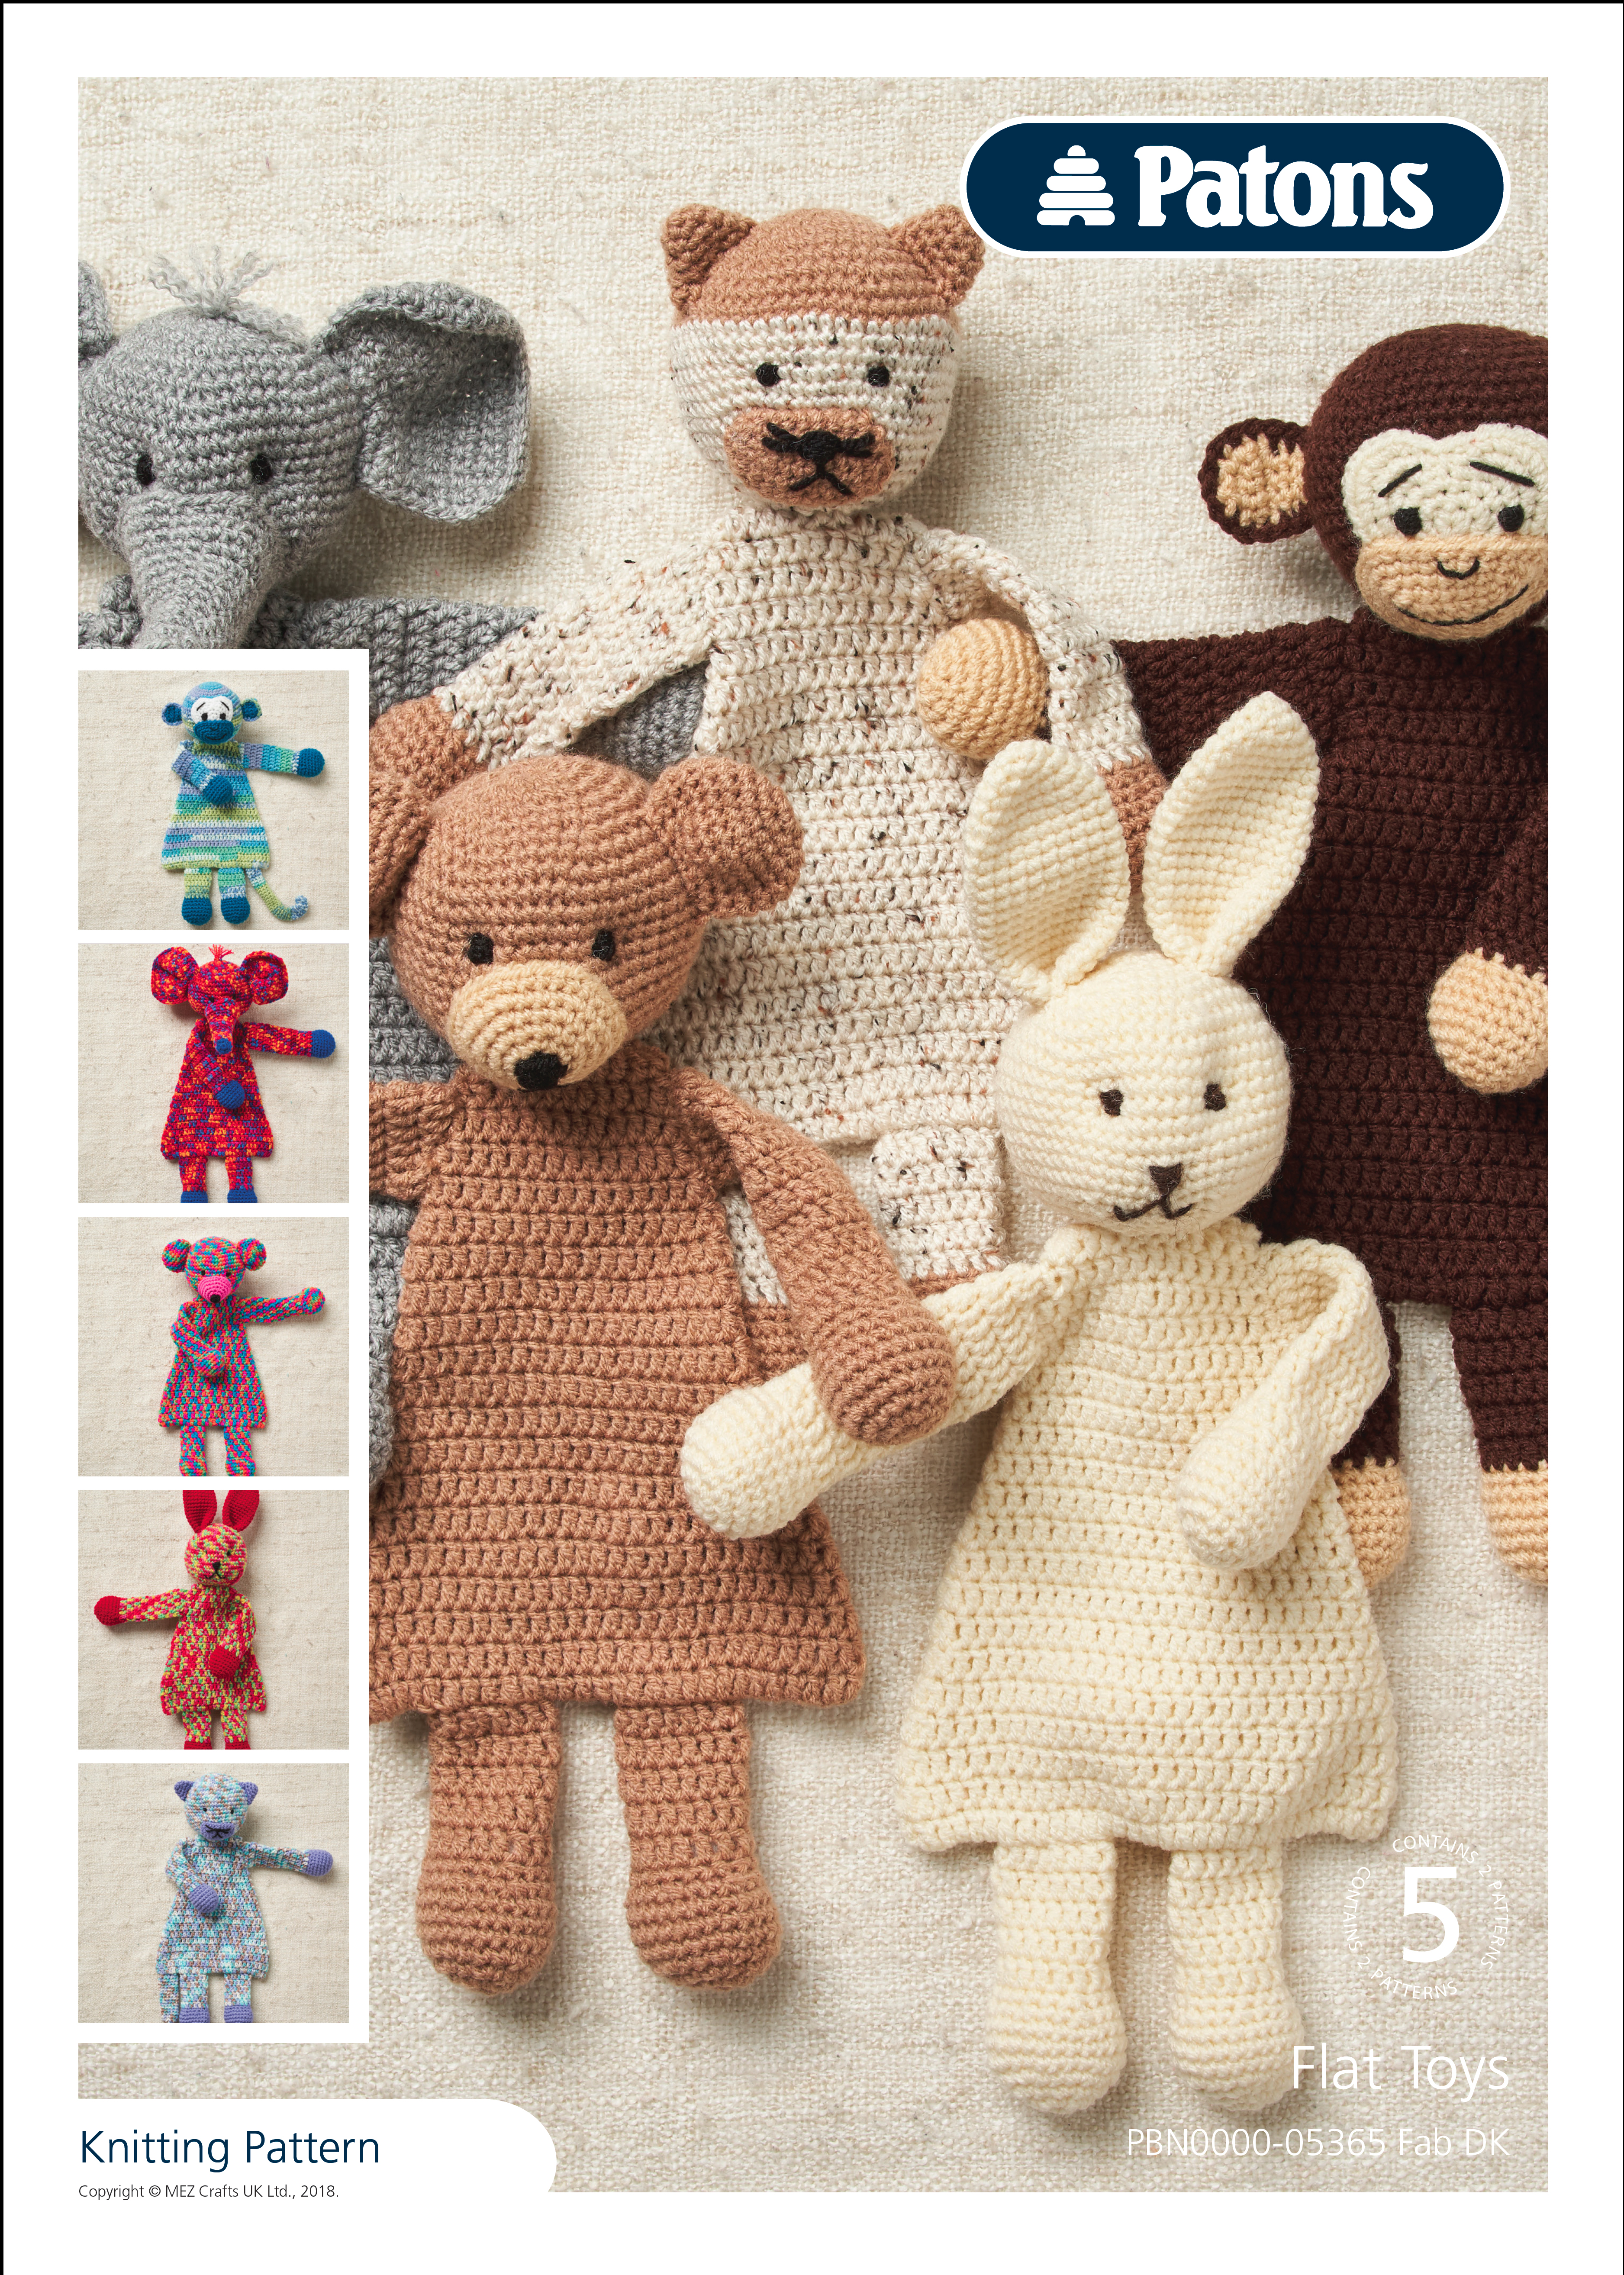 Picture of Patons Pattern Leaflet: Flat Toys